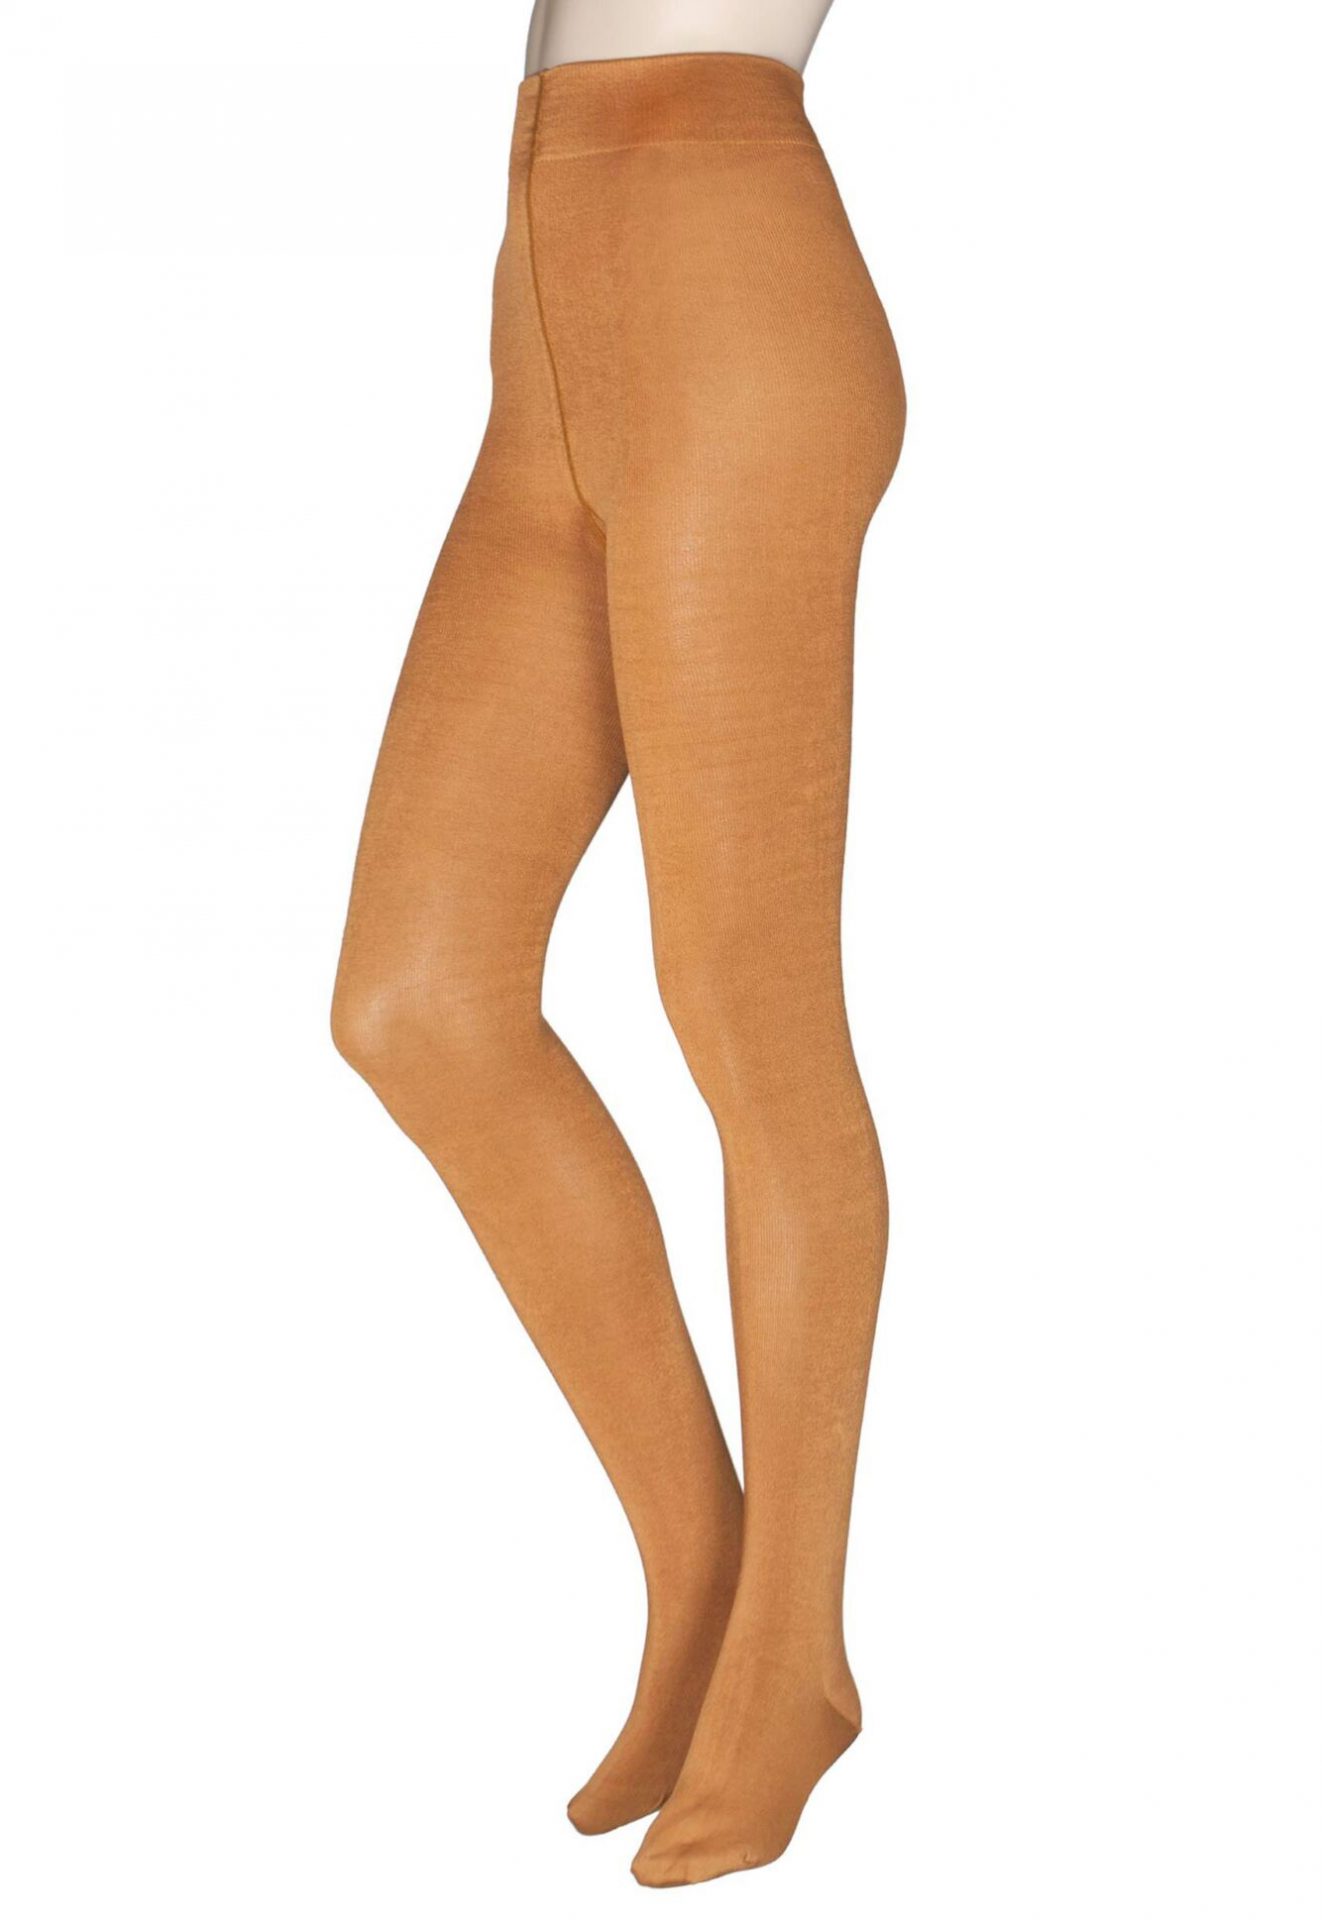 Bamboo Hosiery: 11 Pairs of Bamboo Tights